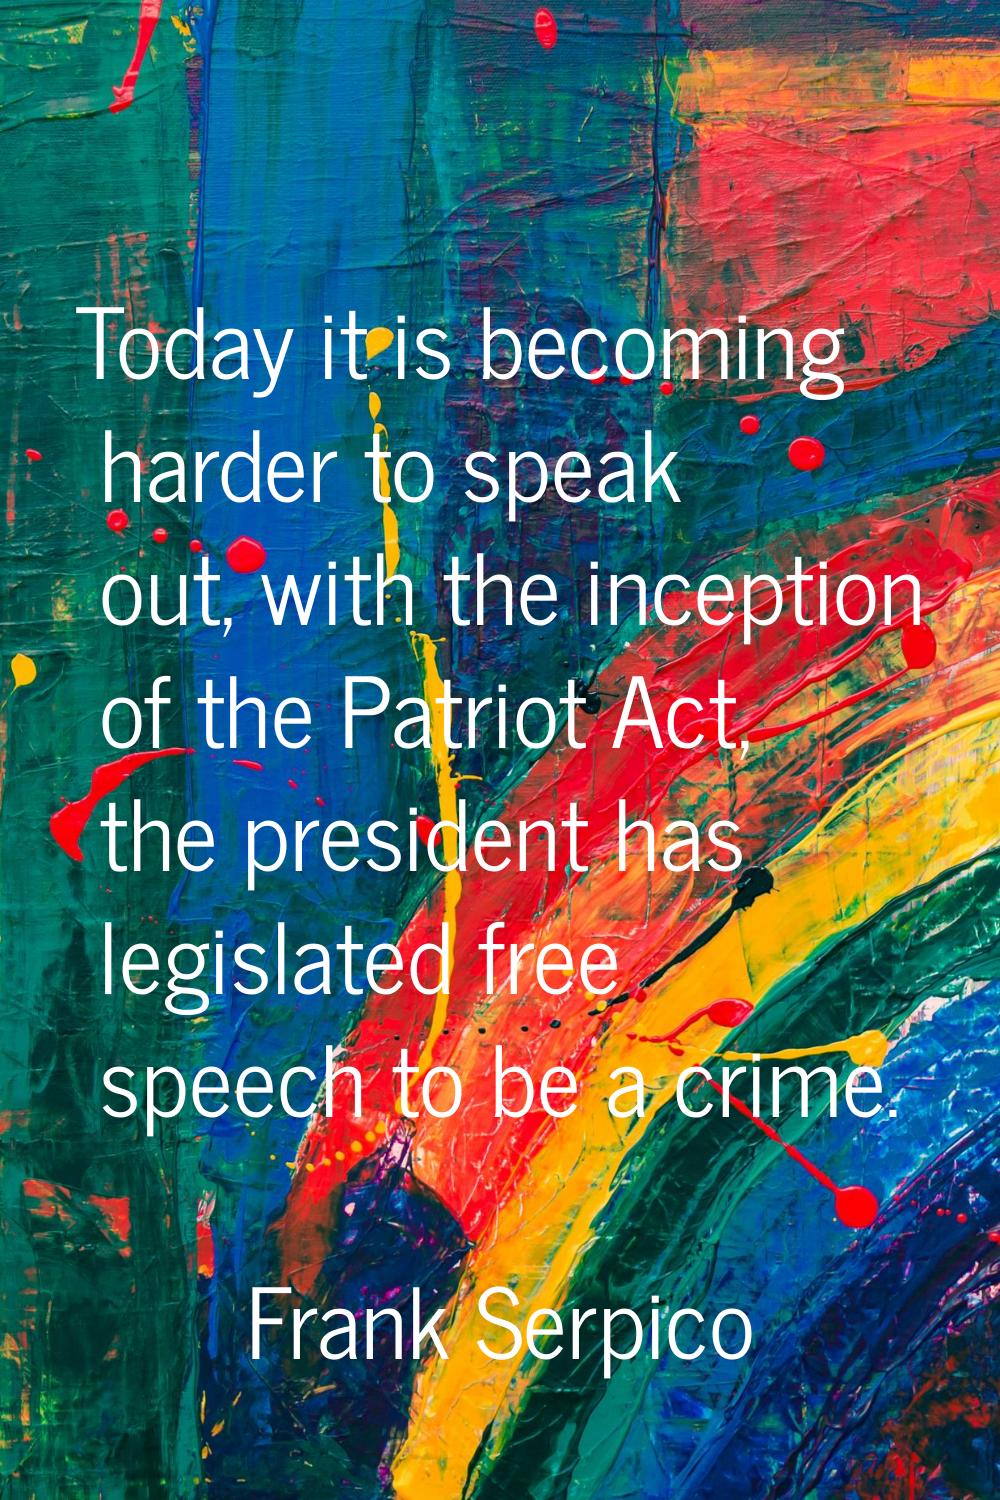 Today it is becoming harder to speak out, with the inception of the Patriot Act, the president has 